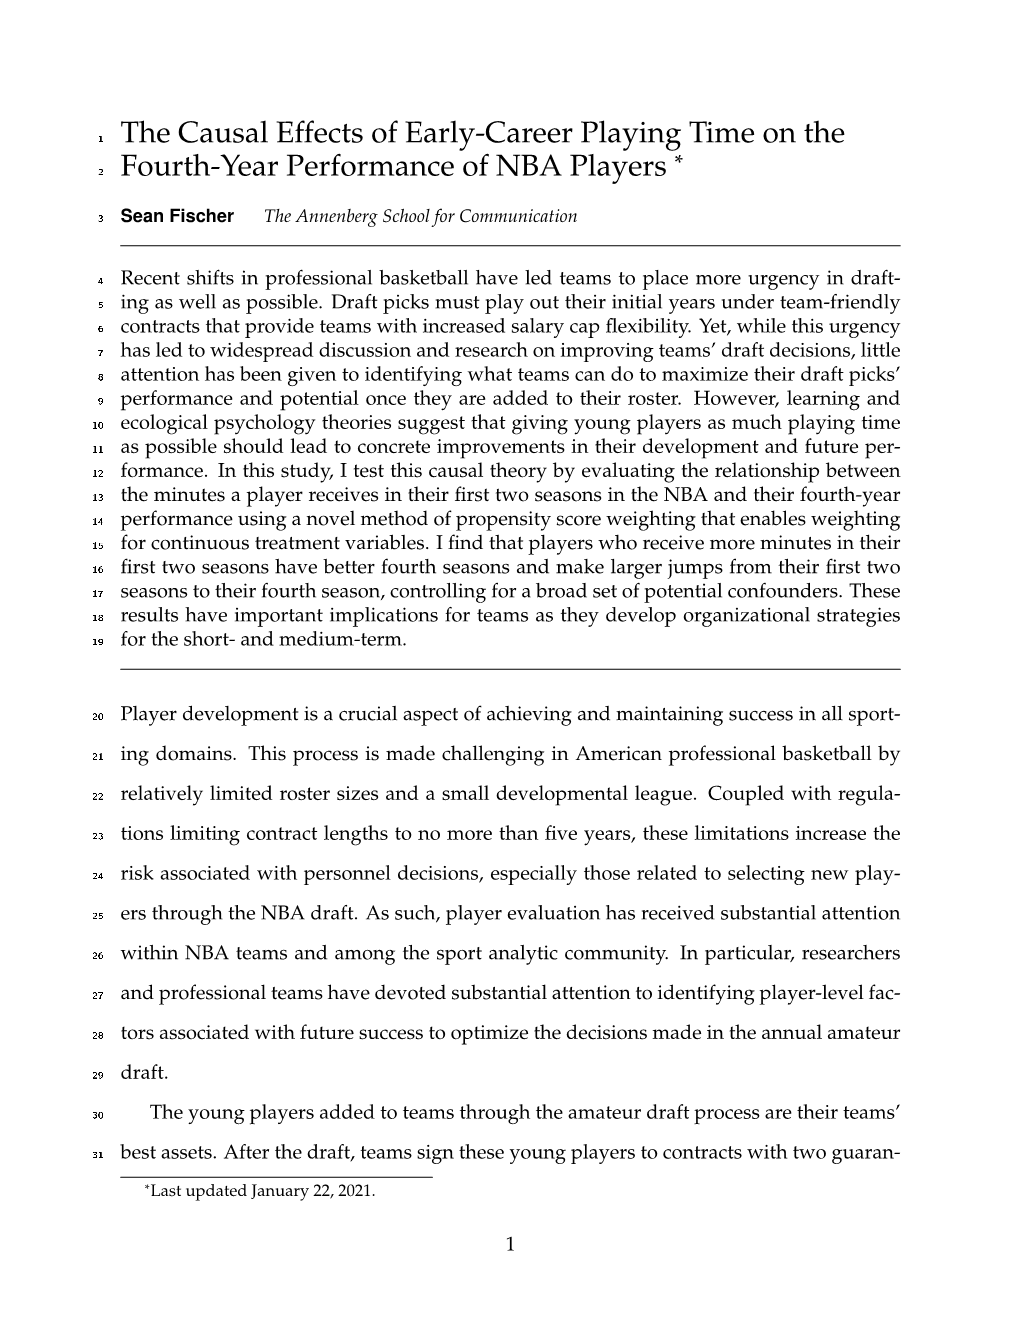 The Causal Effects of Early-Career Playing Time on the Fourth-Year Performance of NBA Players *